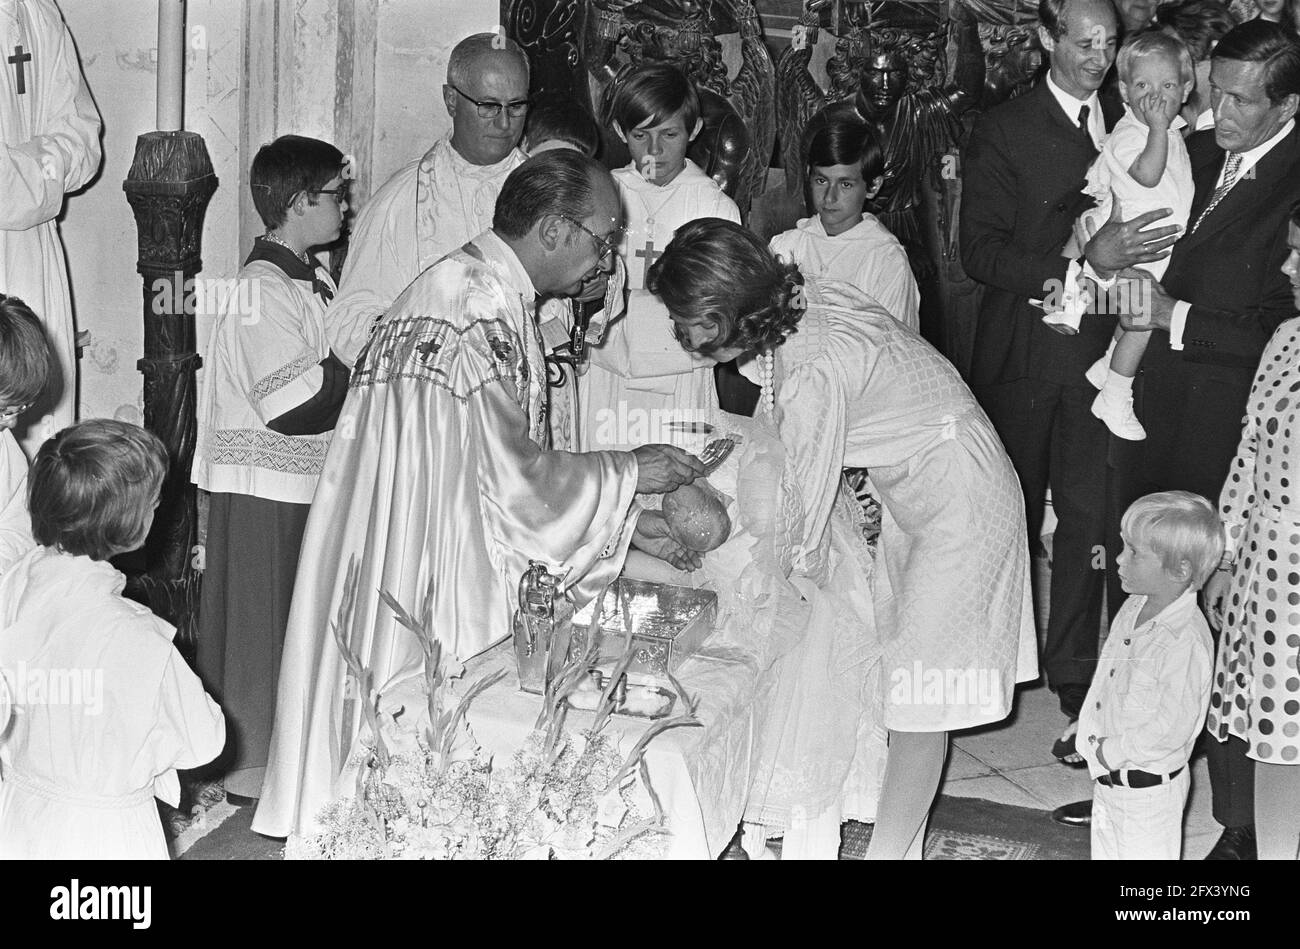 Baptism of Princess Maria Carolina Christina in Lignieres (daughter Irene), during baptism, Princess Irene with her daughter, July 20, 1974, baptisms, royal family, princesses, The Netherlands, 20th century press agency photo, news to remember, documentary, historic photography 1945-1990, visual stories, human history of the Twentieth Century, capturing moments in time Stock Photo